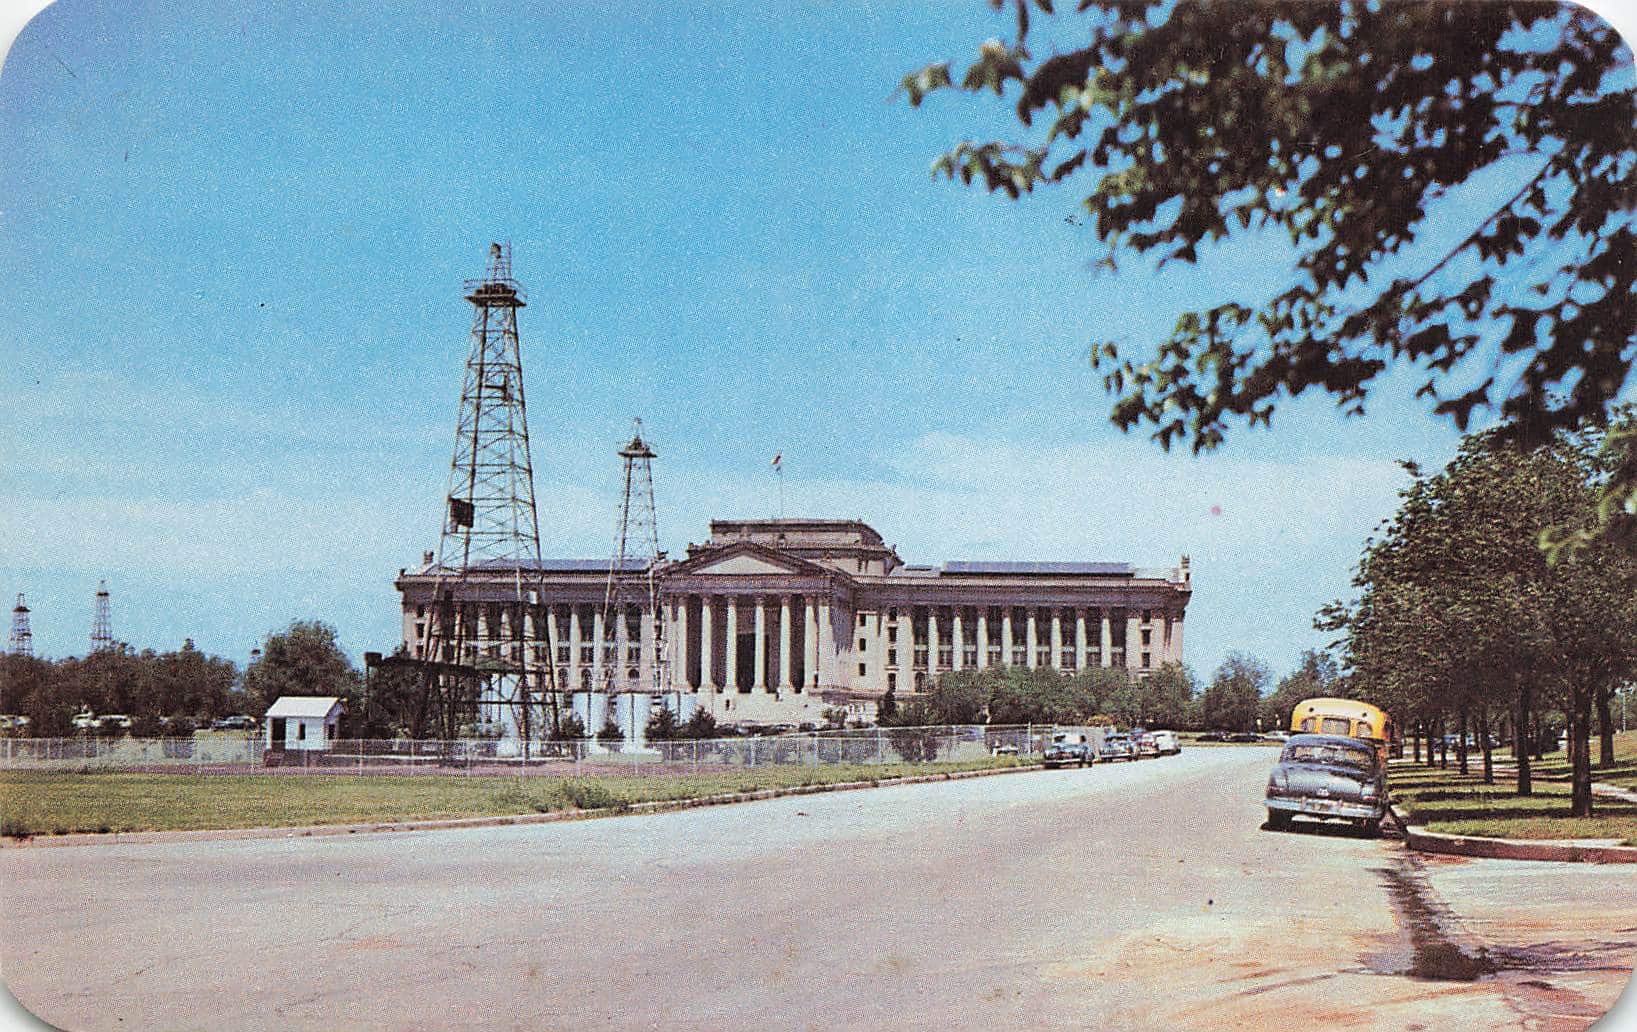 The Oklahoma State Capitol building showing the surrounding oil derricks.